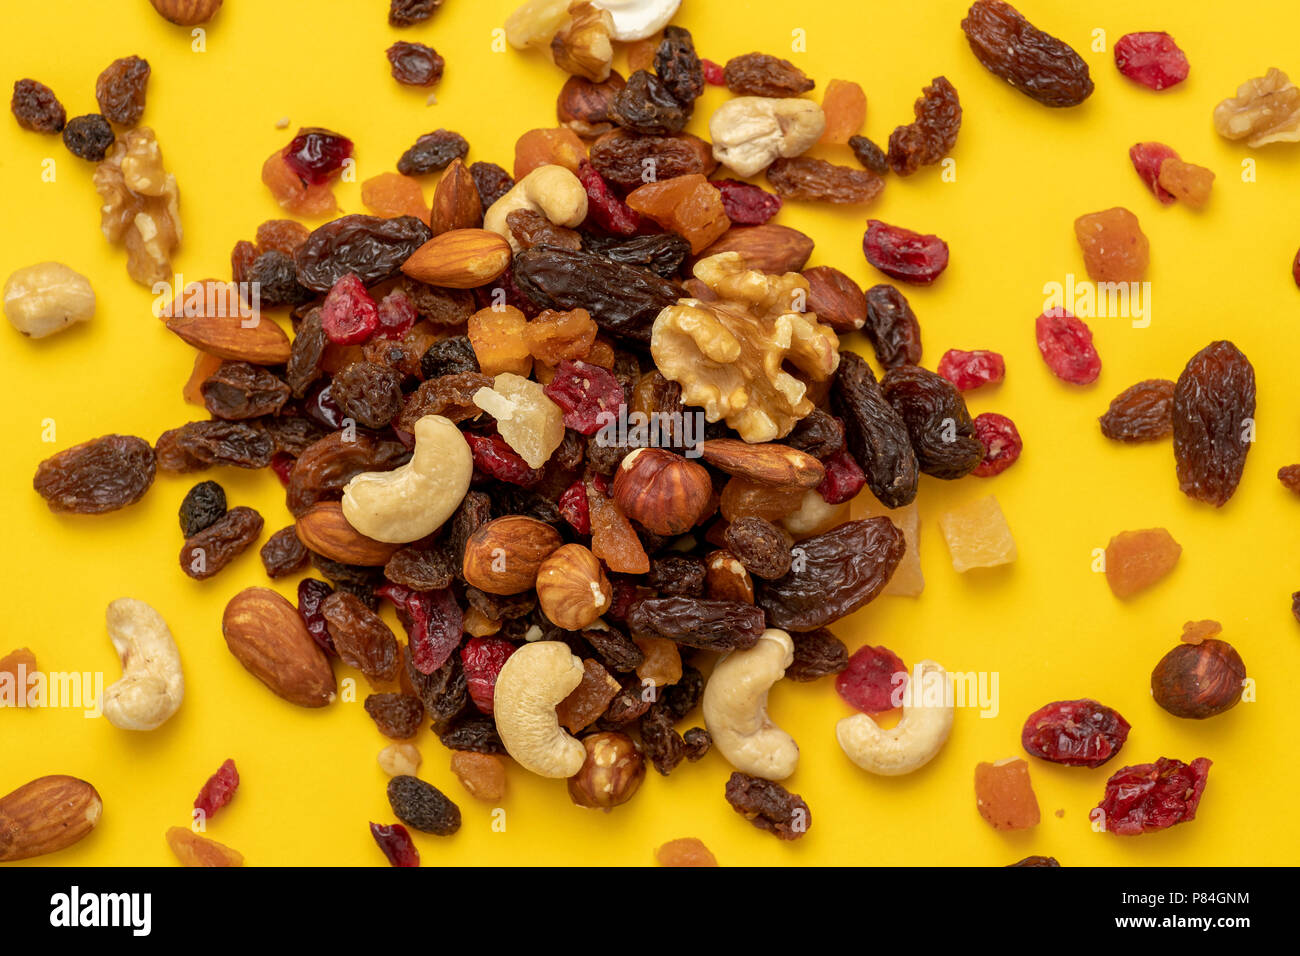 Close up of mix of dried fruits and nuts on a yellow background Stock Photo